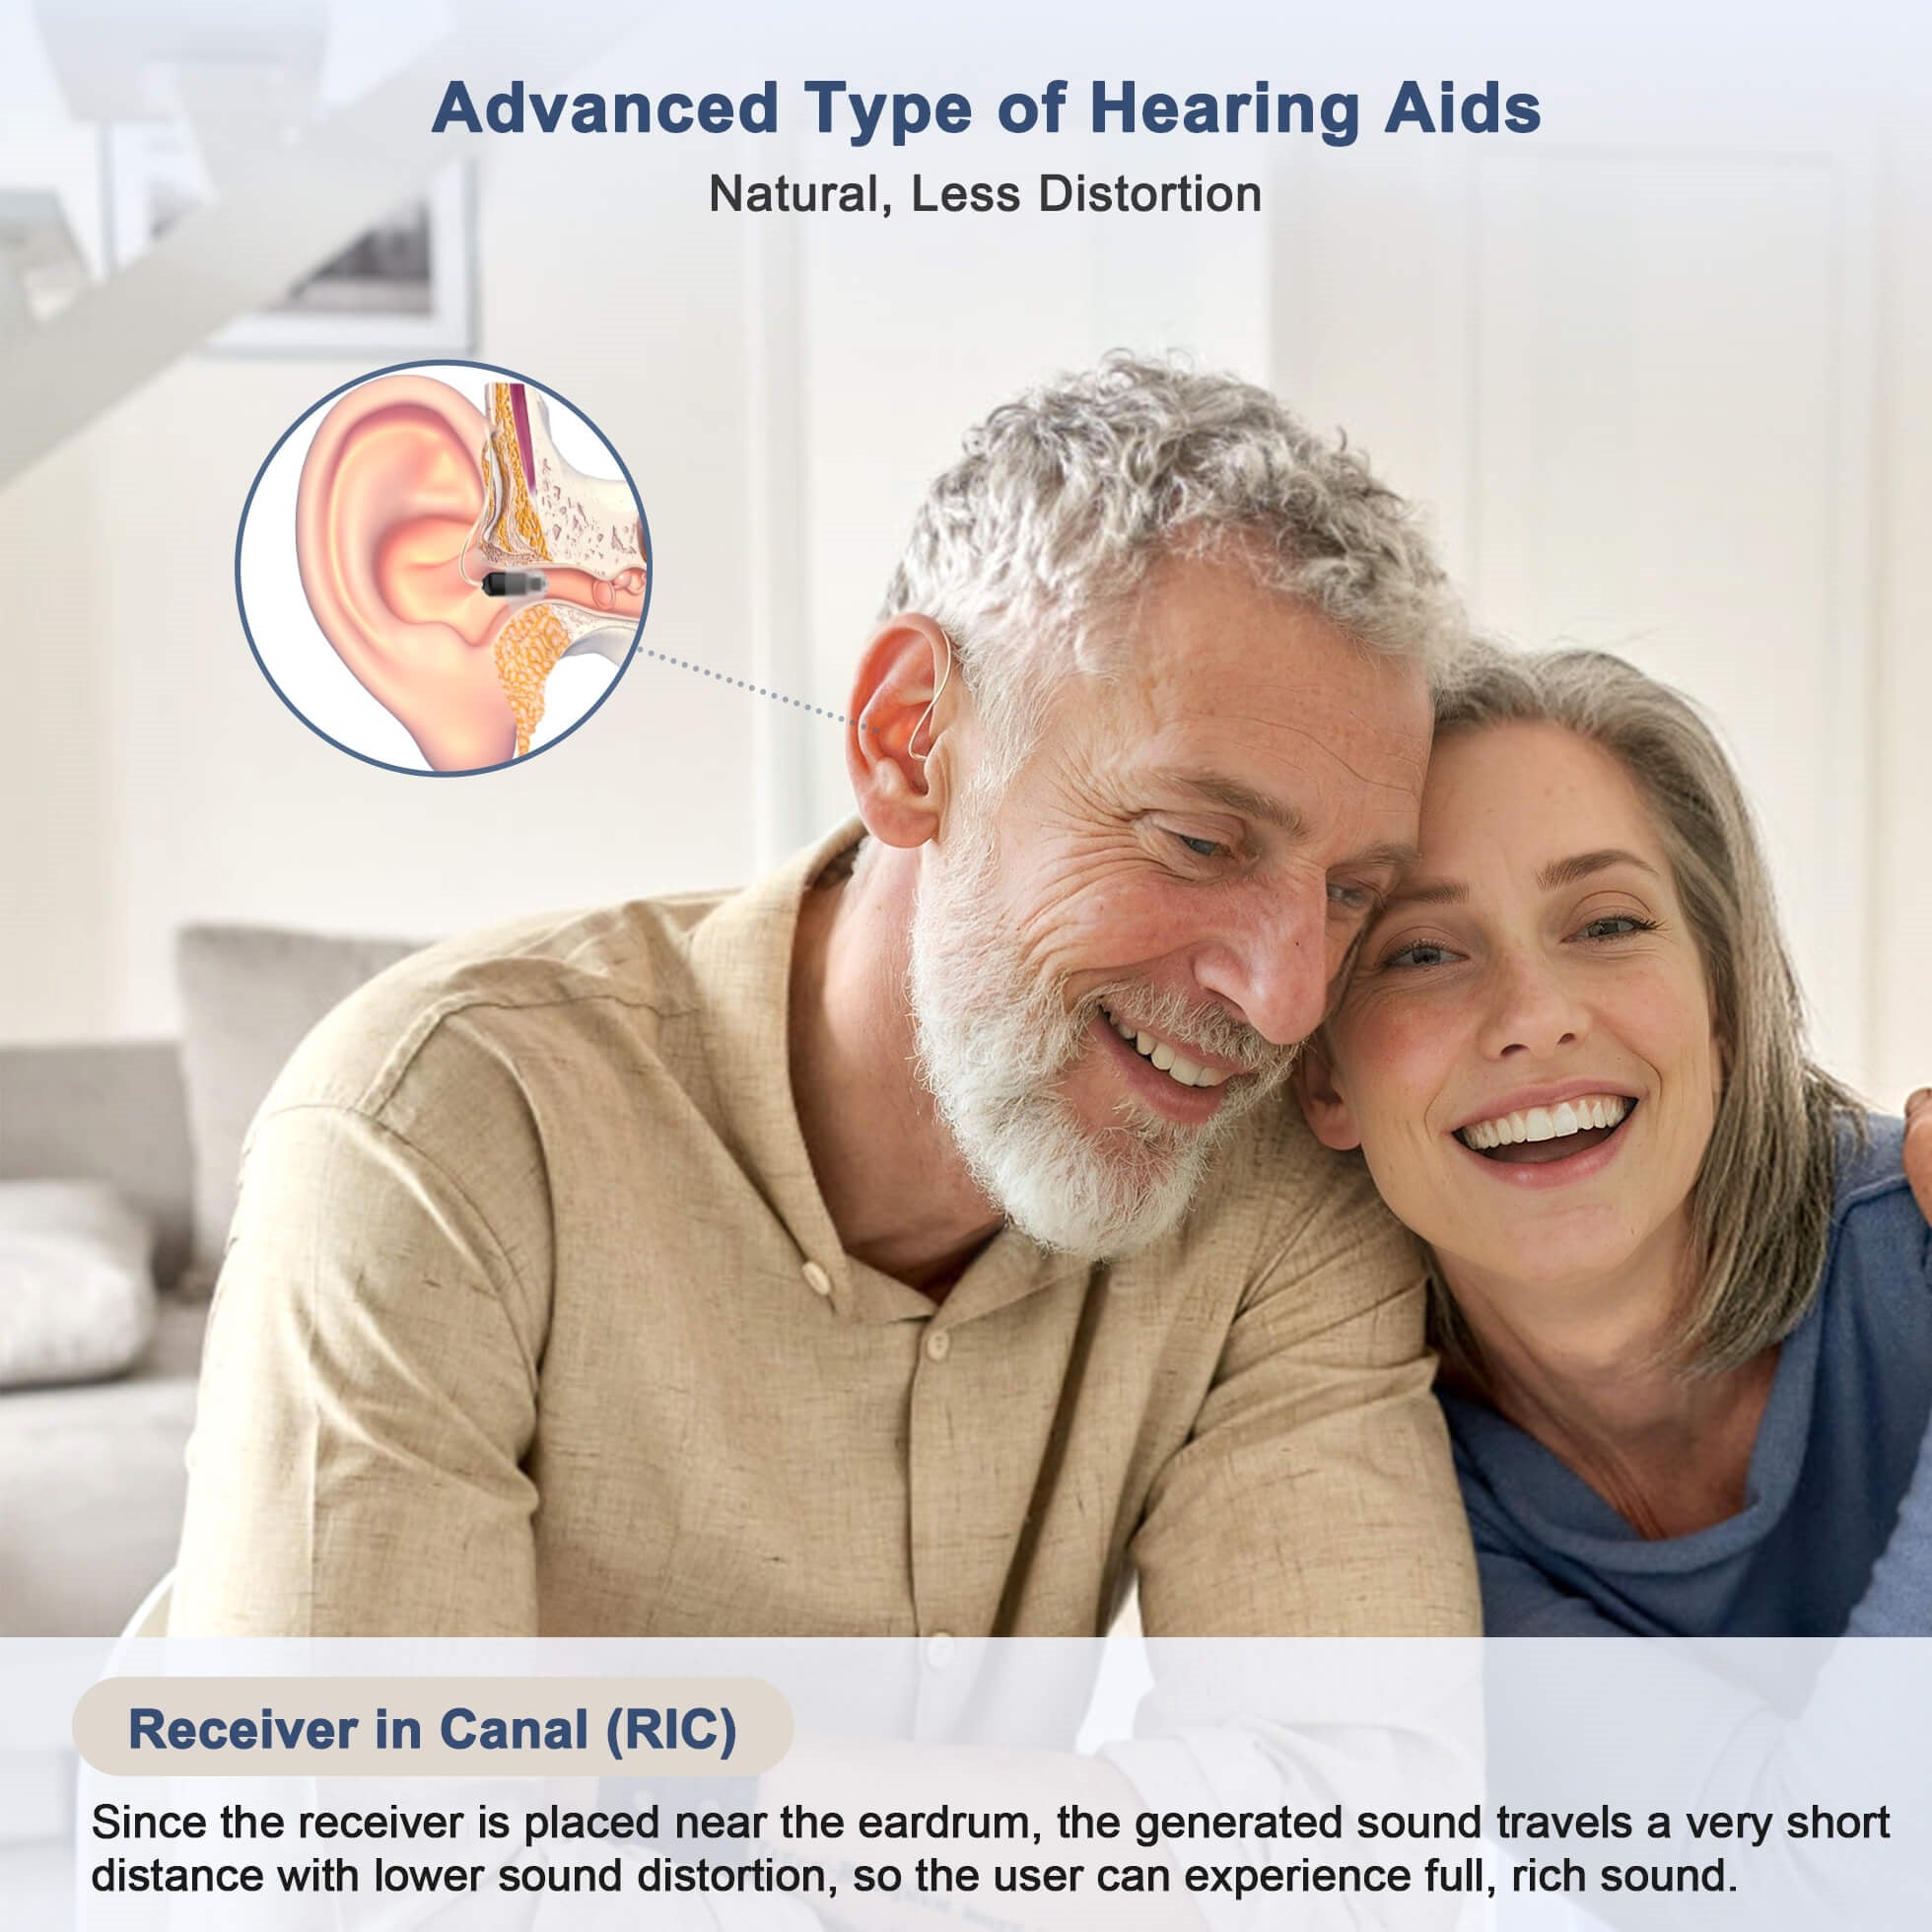 Hearing Aid Devices for Seniors: Small Lucid516 RIC-a1 with Advanced Hearing Instrument Technology, Best Hearing Aid for Tinnitus